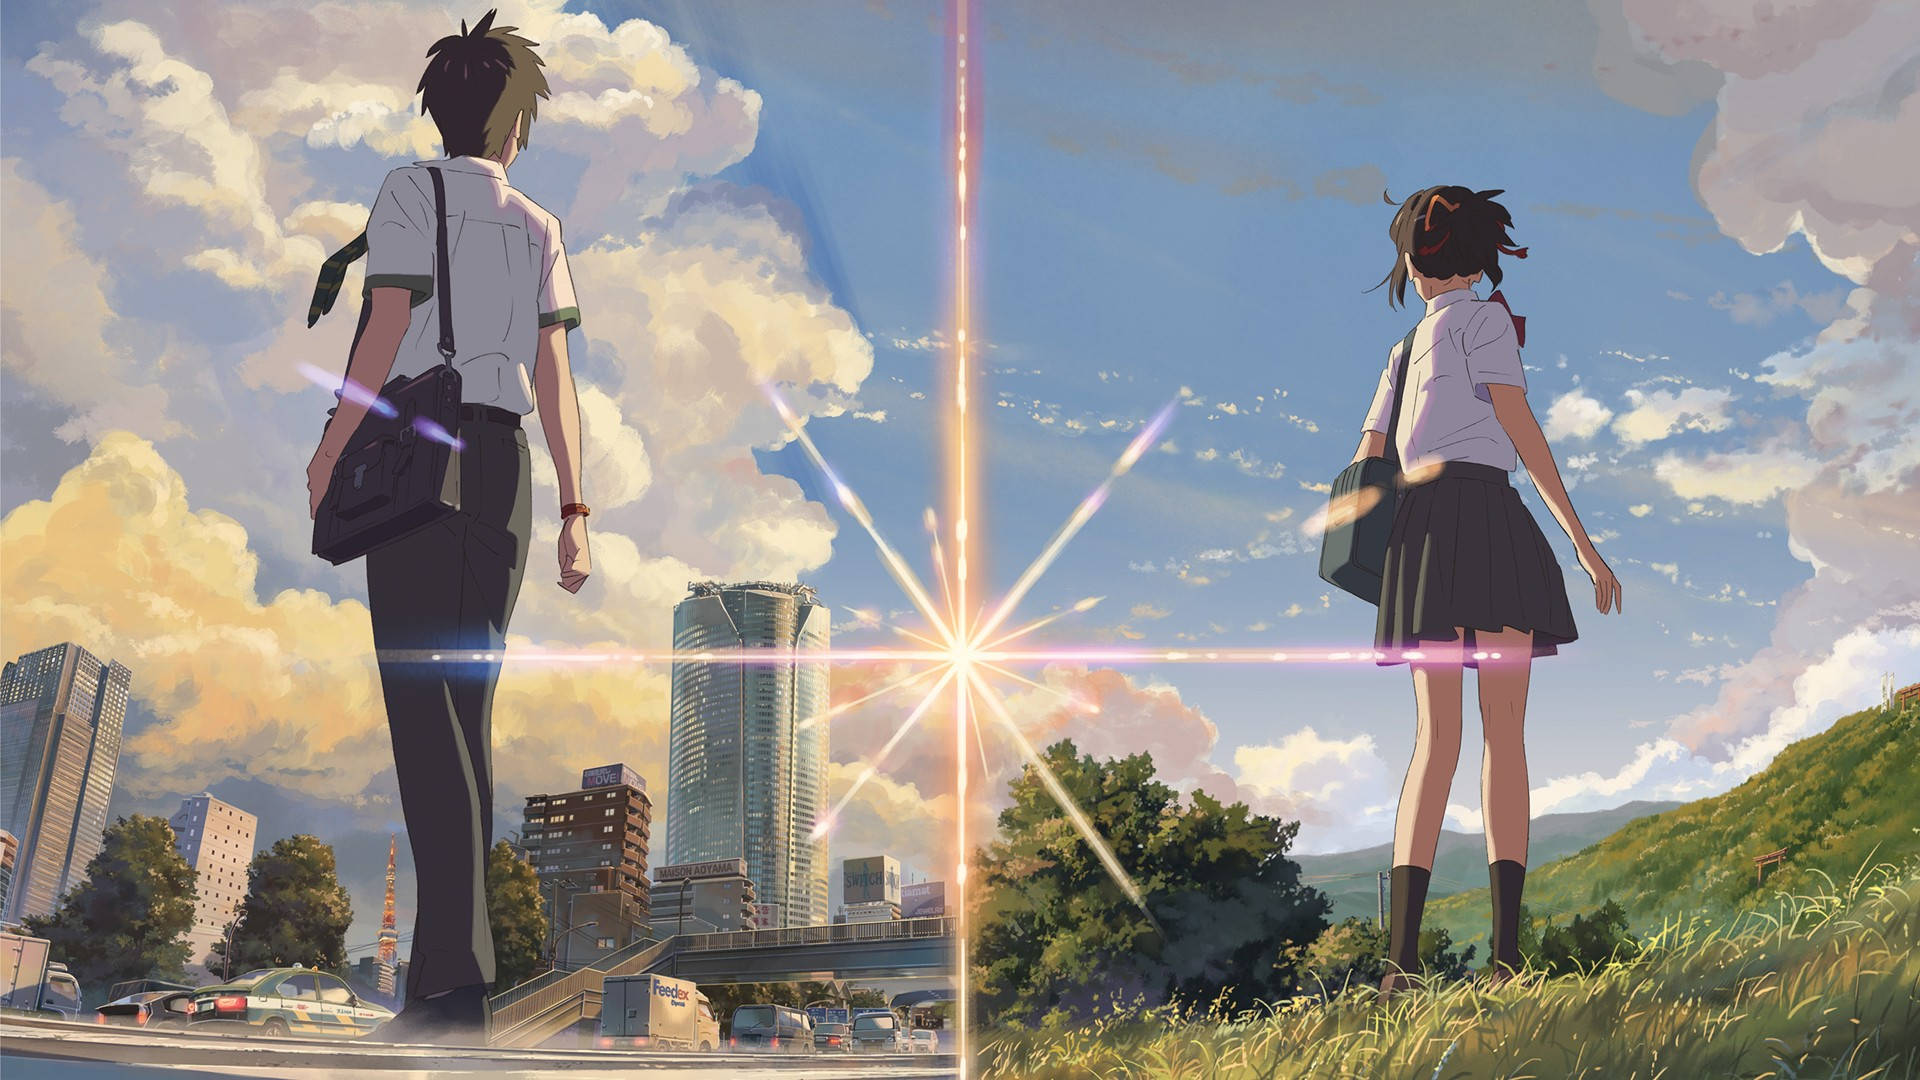 Two Worlds Your Name Anime 2016